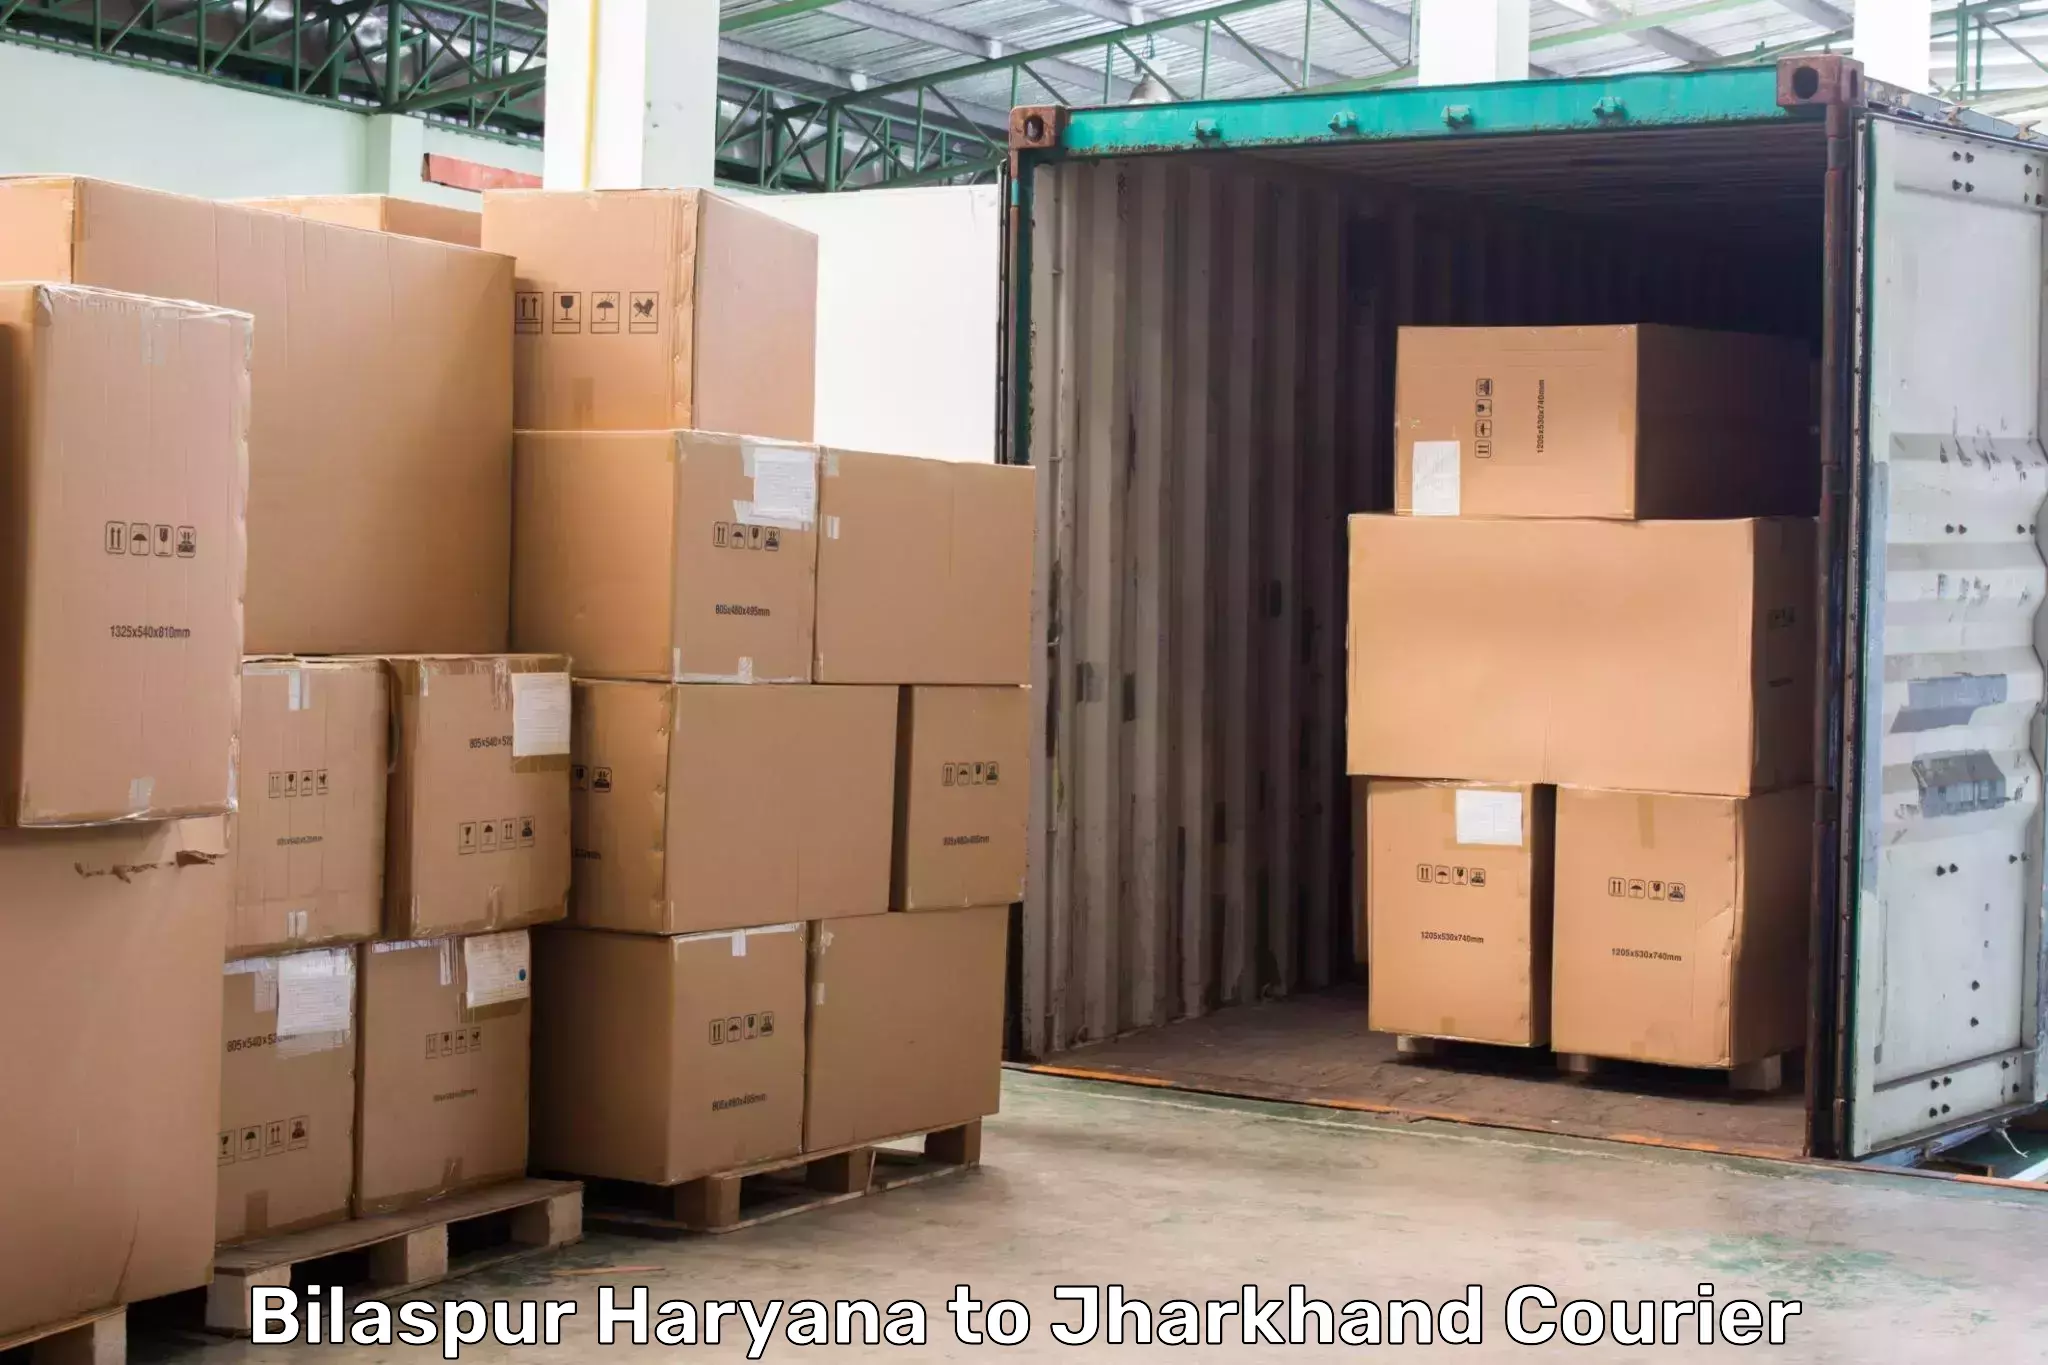 24-hour courier services Bilaspur Haryana to Jharkhand